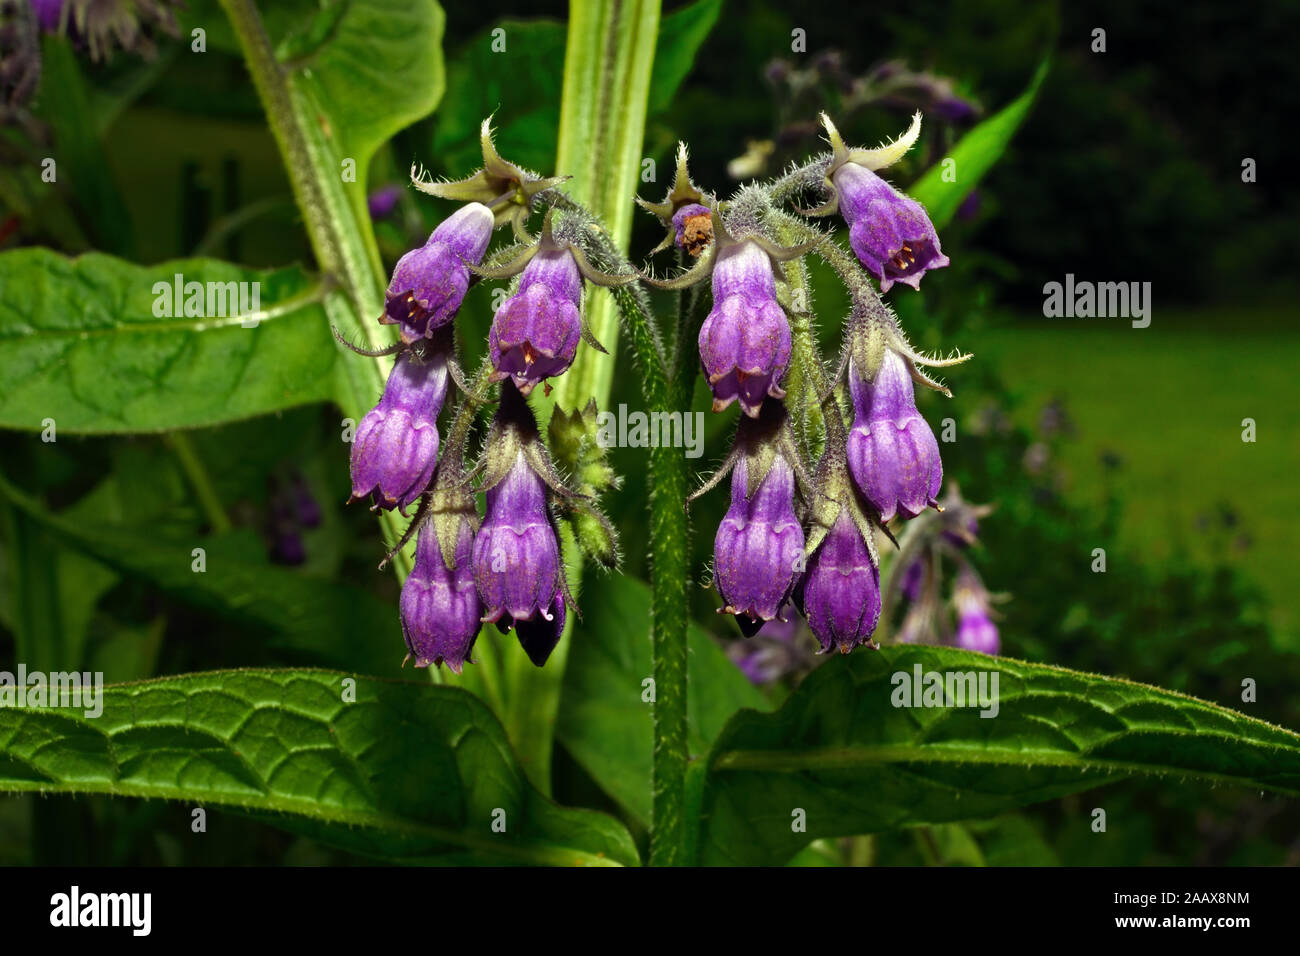 Symphytum officinale (comfrey) is native to Europe where it growes in damp, grassy places. Stock Photo